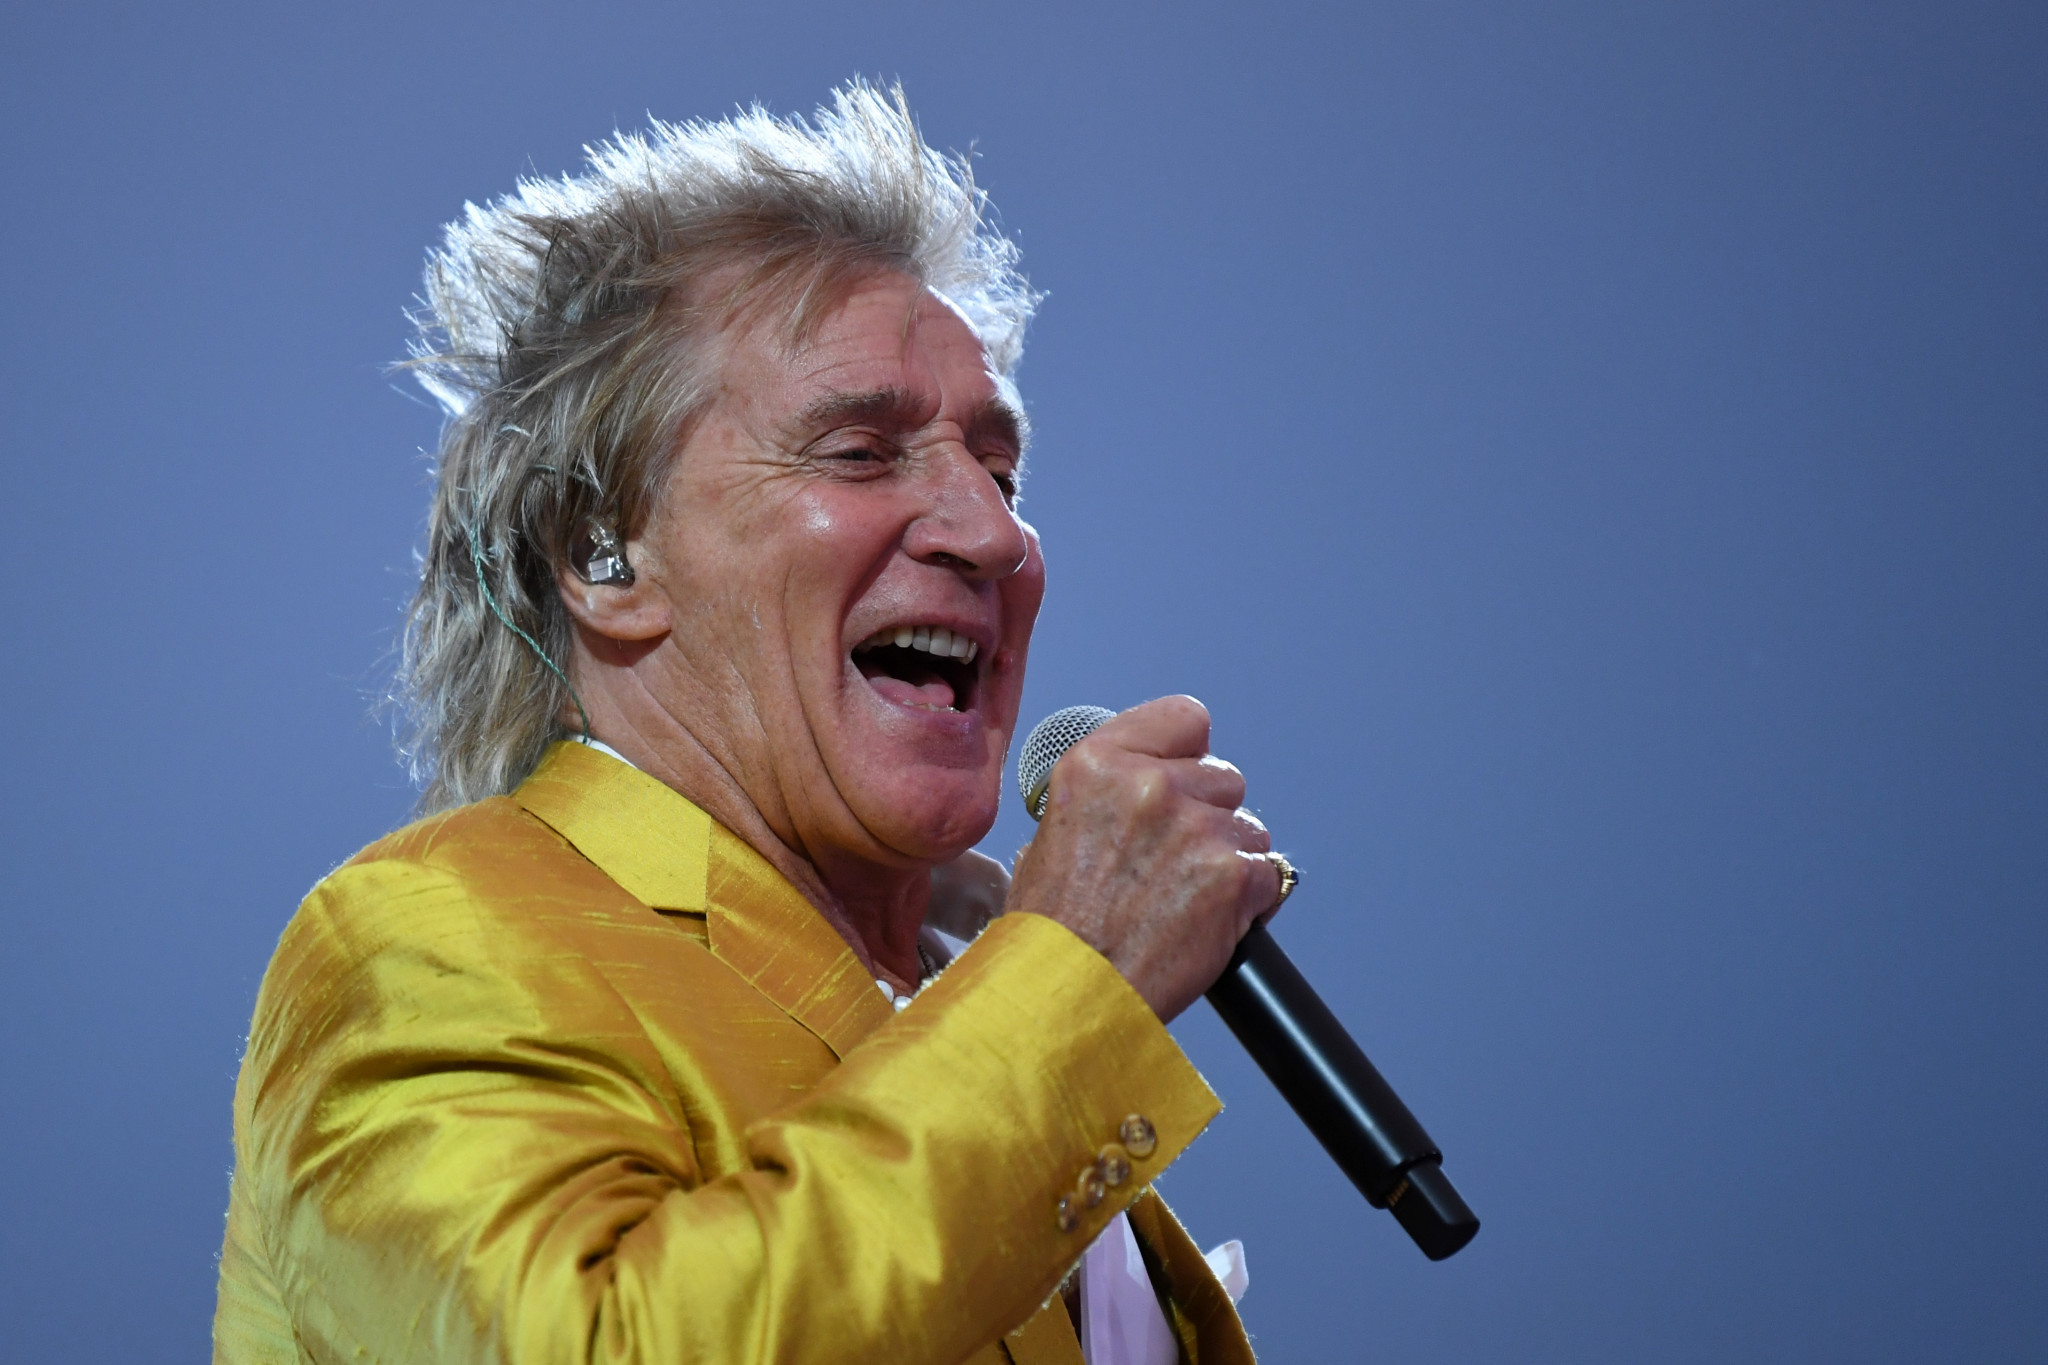 British singer Sir Rod Stewart reveals he turned down lucrative offer to perform in World Cup host nation Qatar